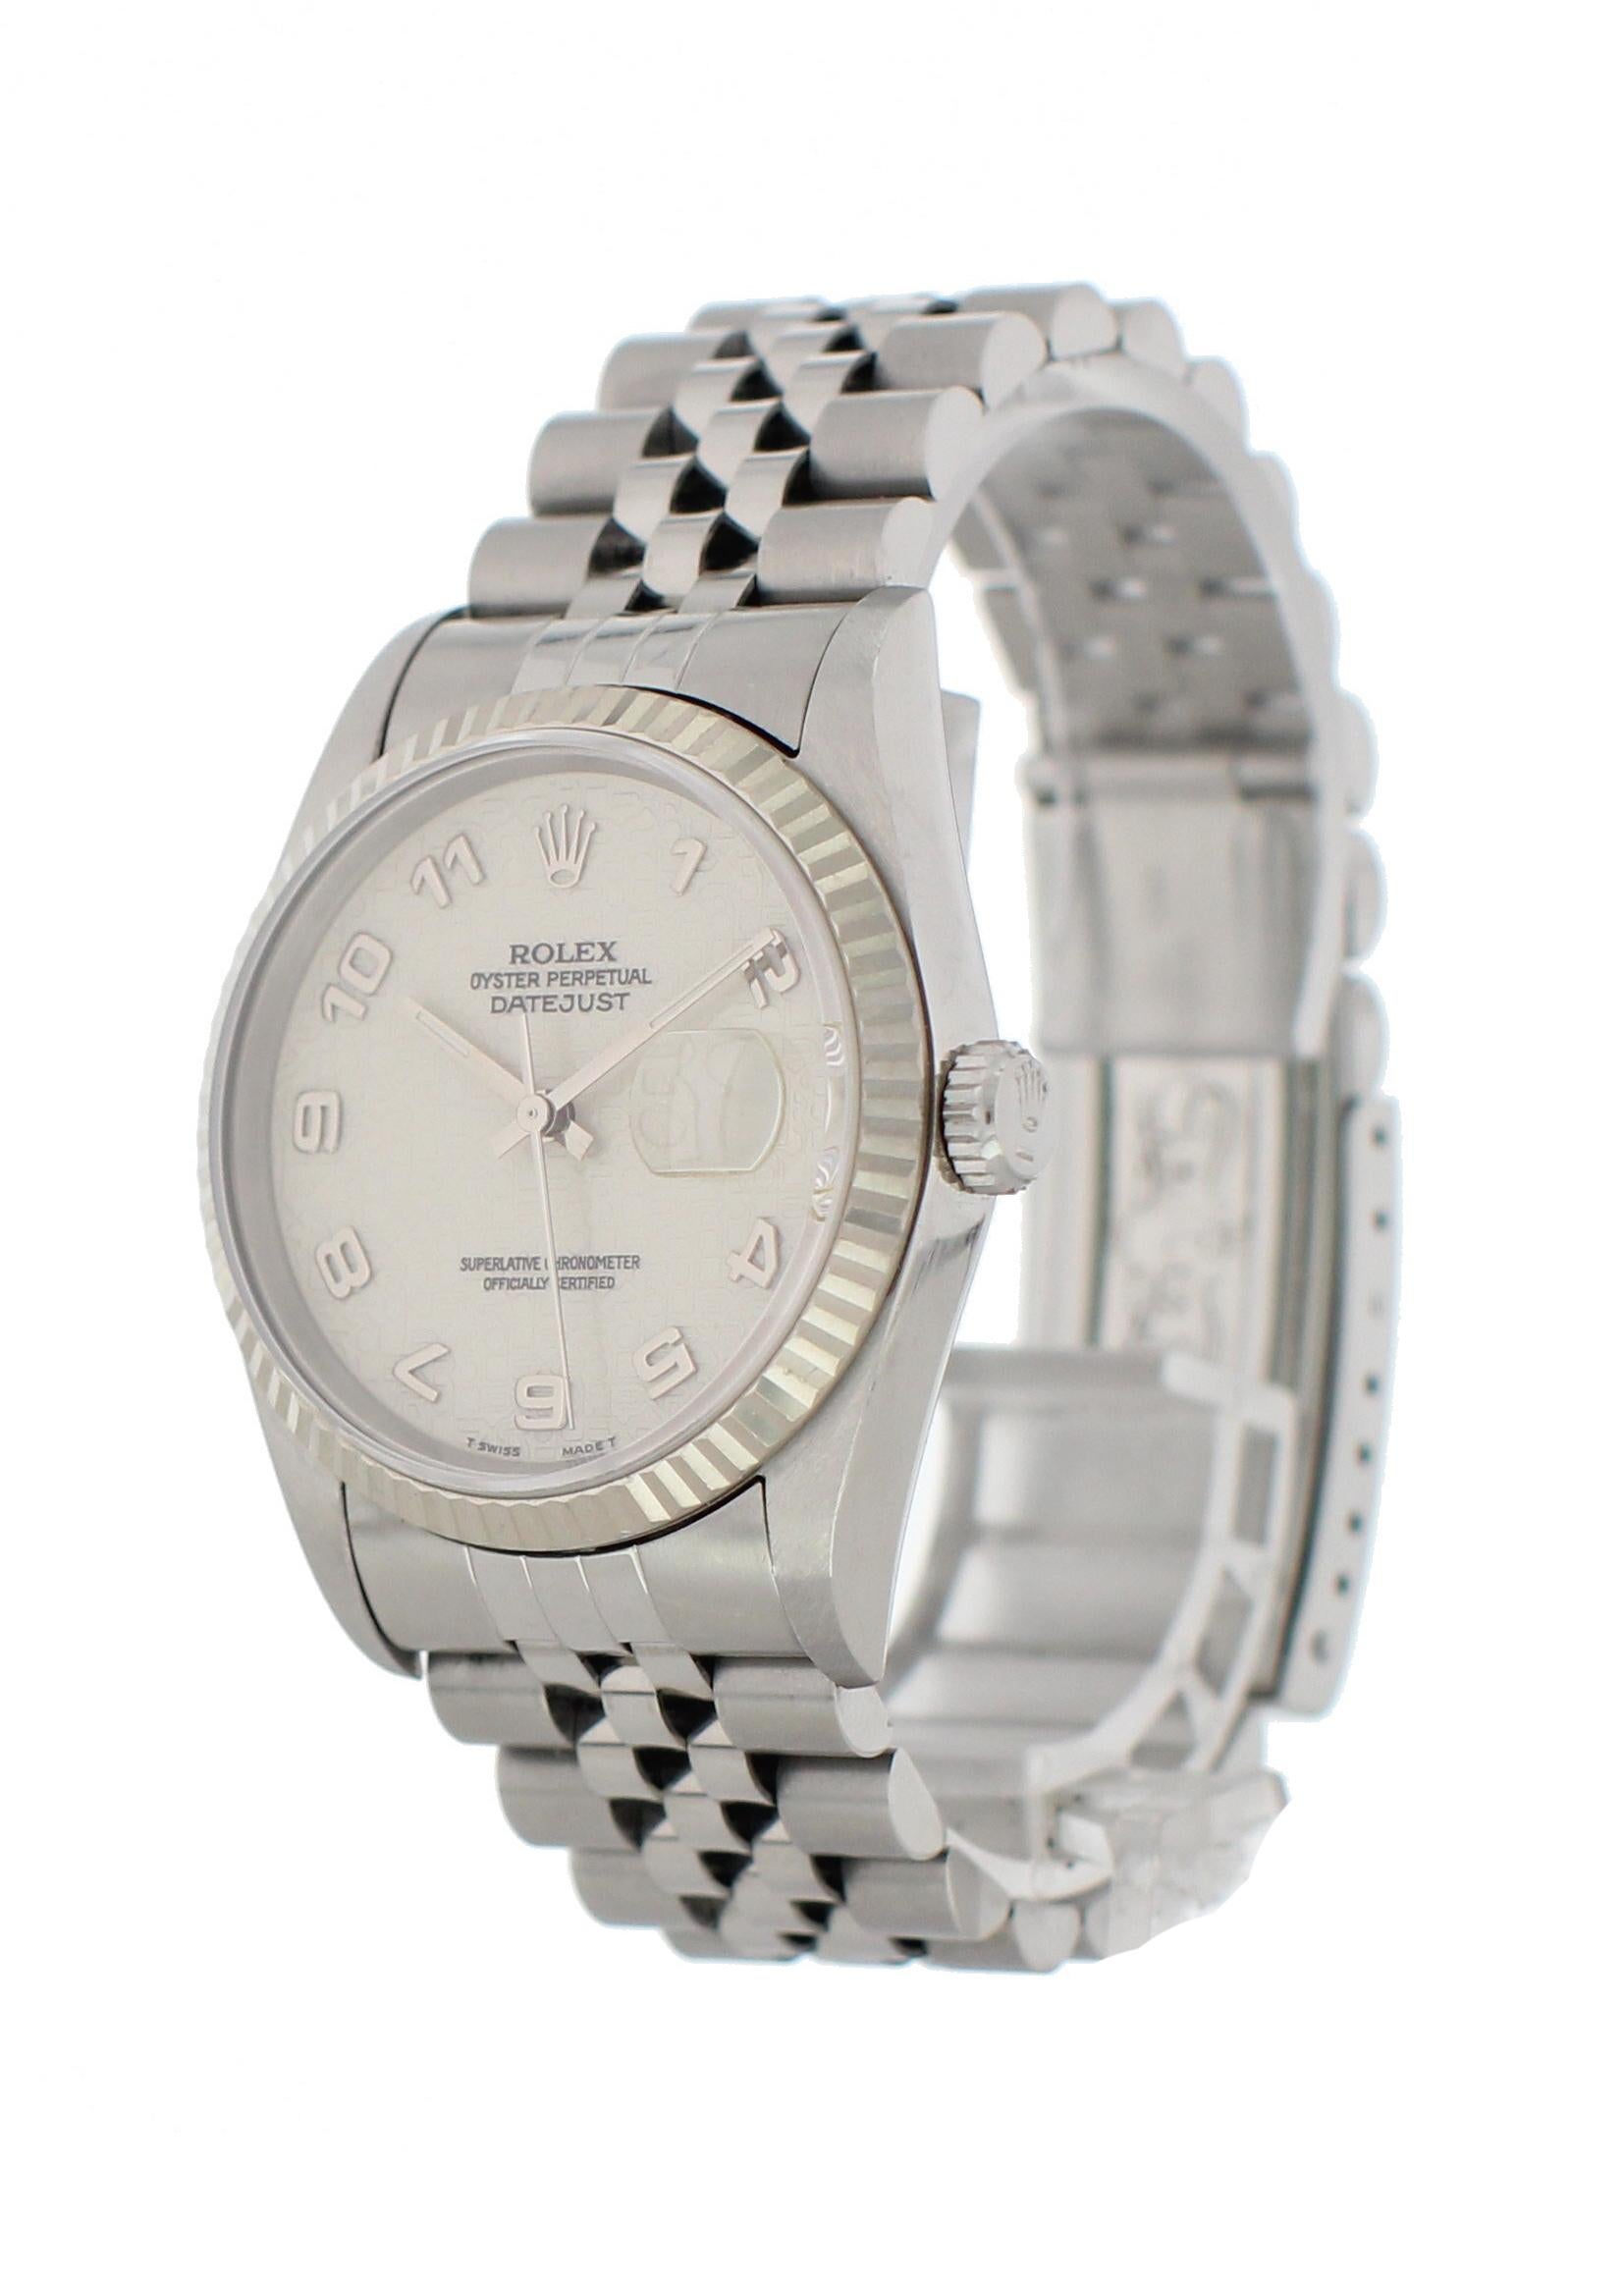 Rolex Oyster Perpetual Datejust 16234 Rolex Dial Men's Watch. 36 mm stainless steel case. 18k white gold Fluted bezel. Off-white dial with steel hands and index markers. Quickset date display by the 3 o'clock position. Stainless steel jubilee band